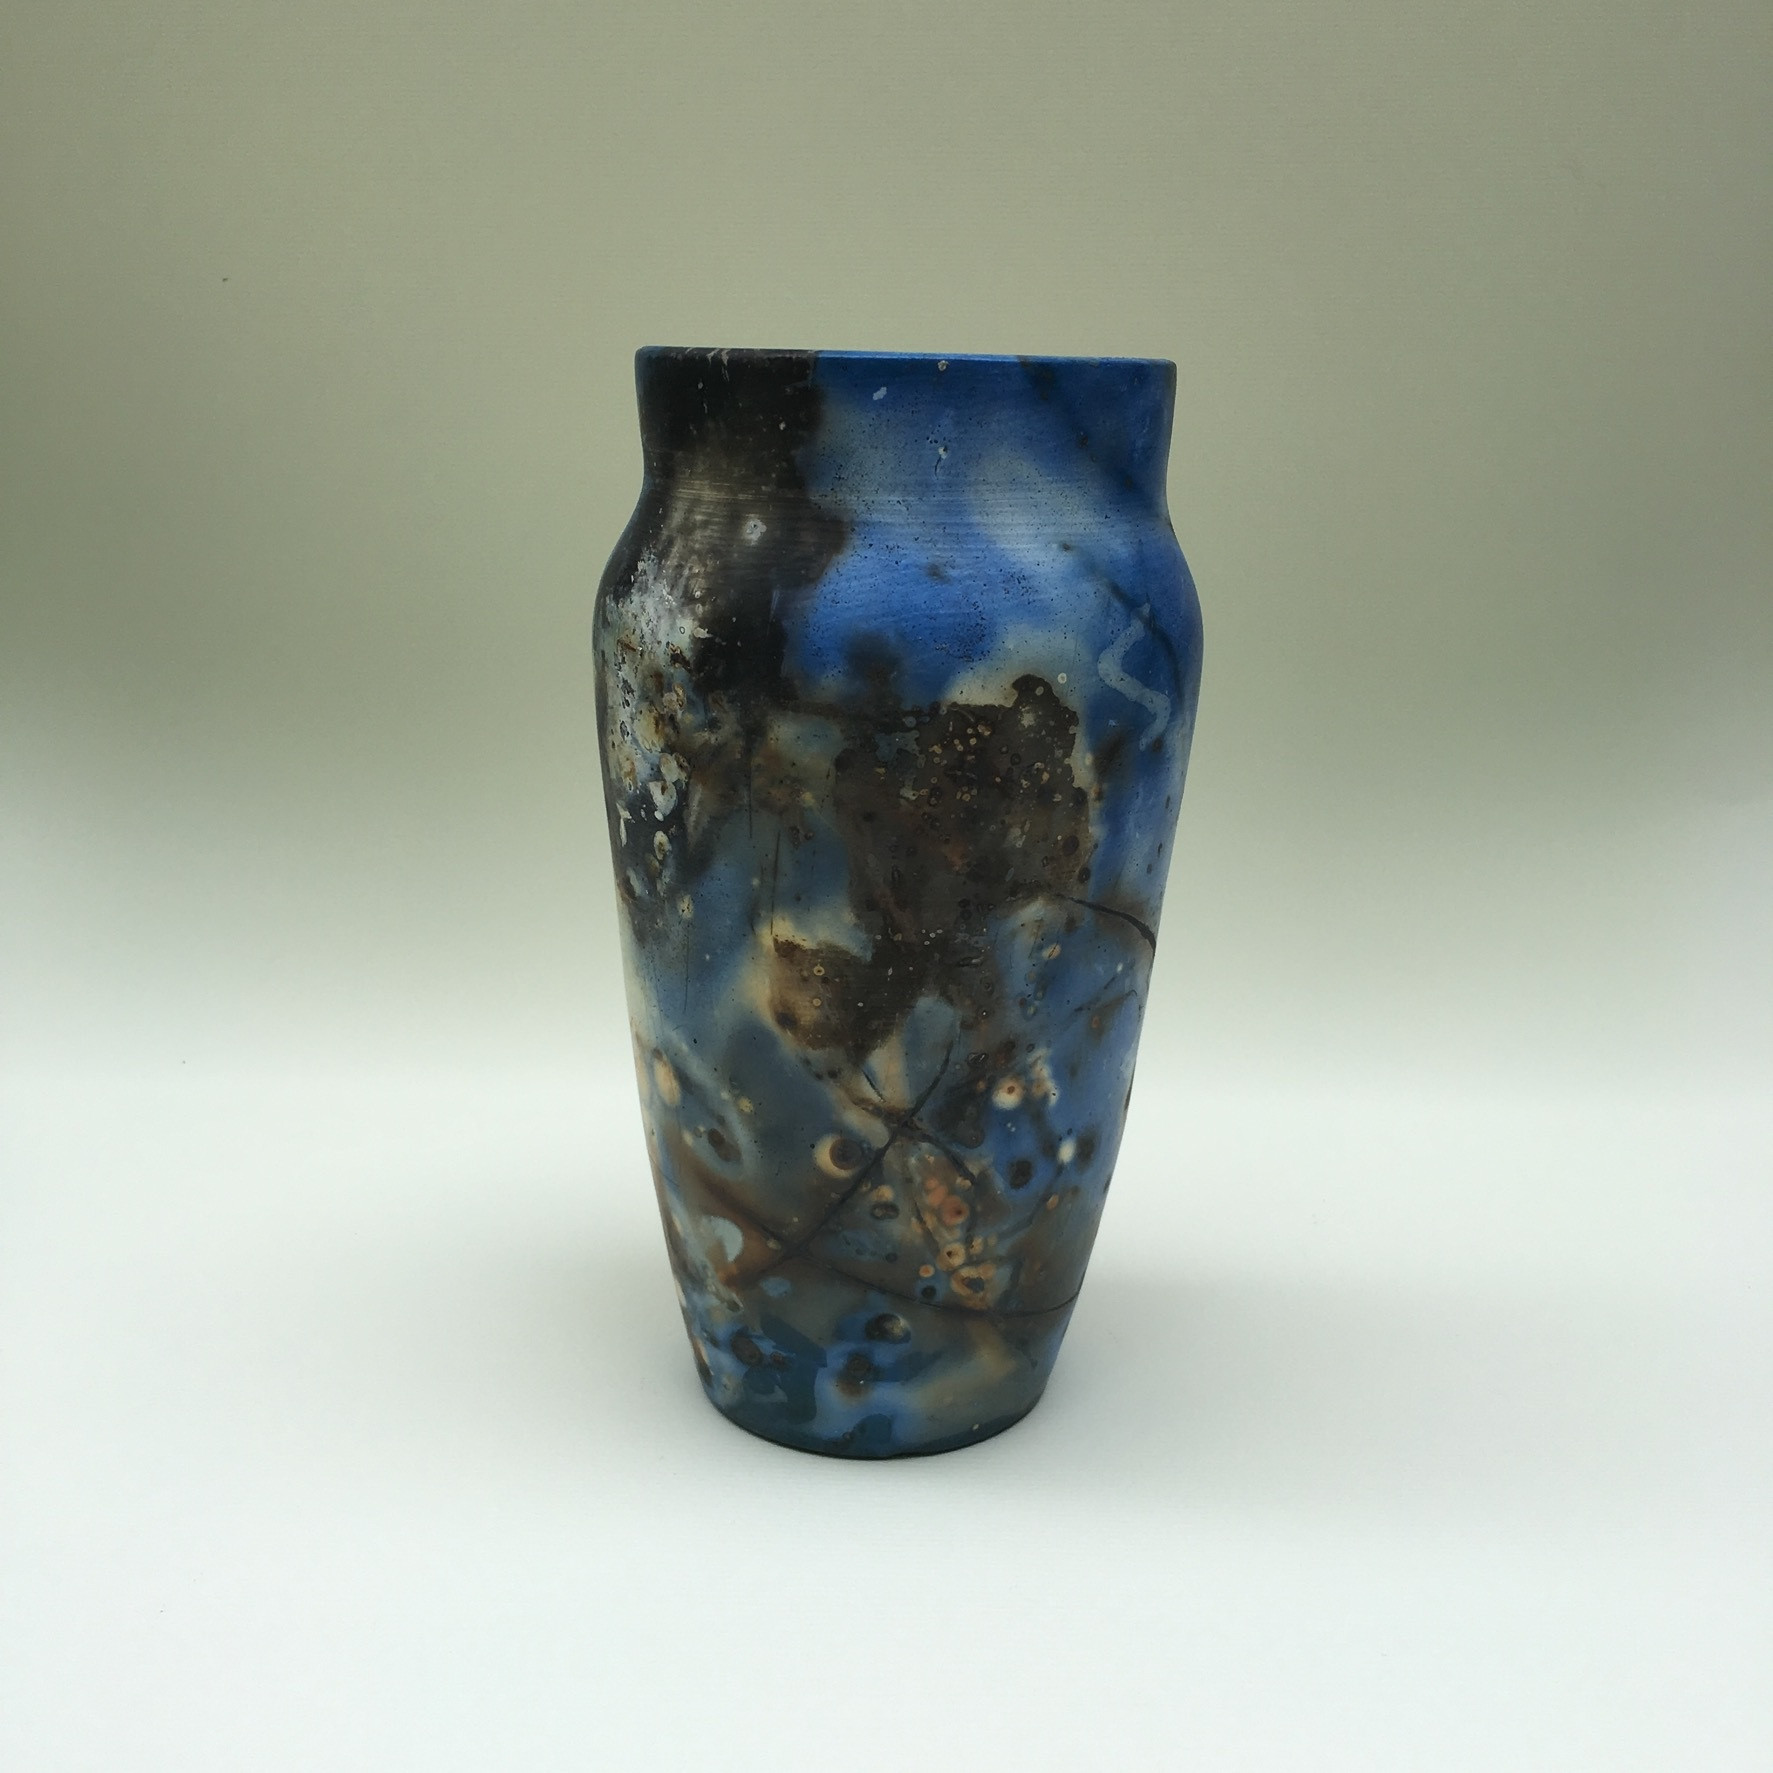 13 Recommended Abingdon Usa Pottery Vase 2024 free download abingdon usa pottery vase of cac submissions creative arts workshop intended for cobalt saggar vase low fired stoneware 7e280b3h x 4e280b3w